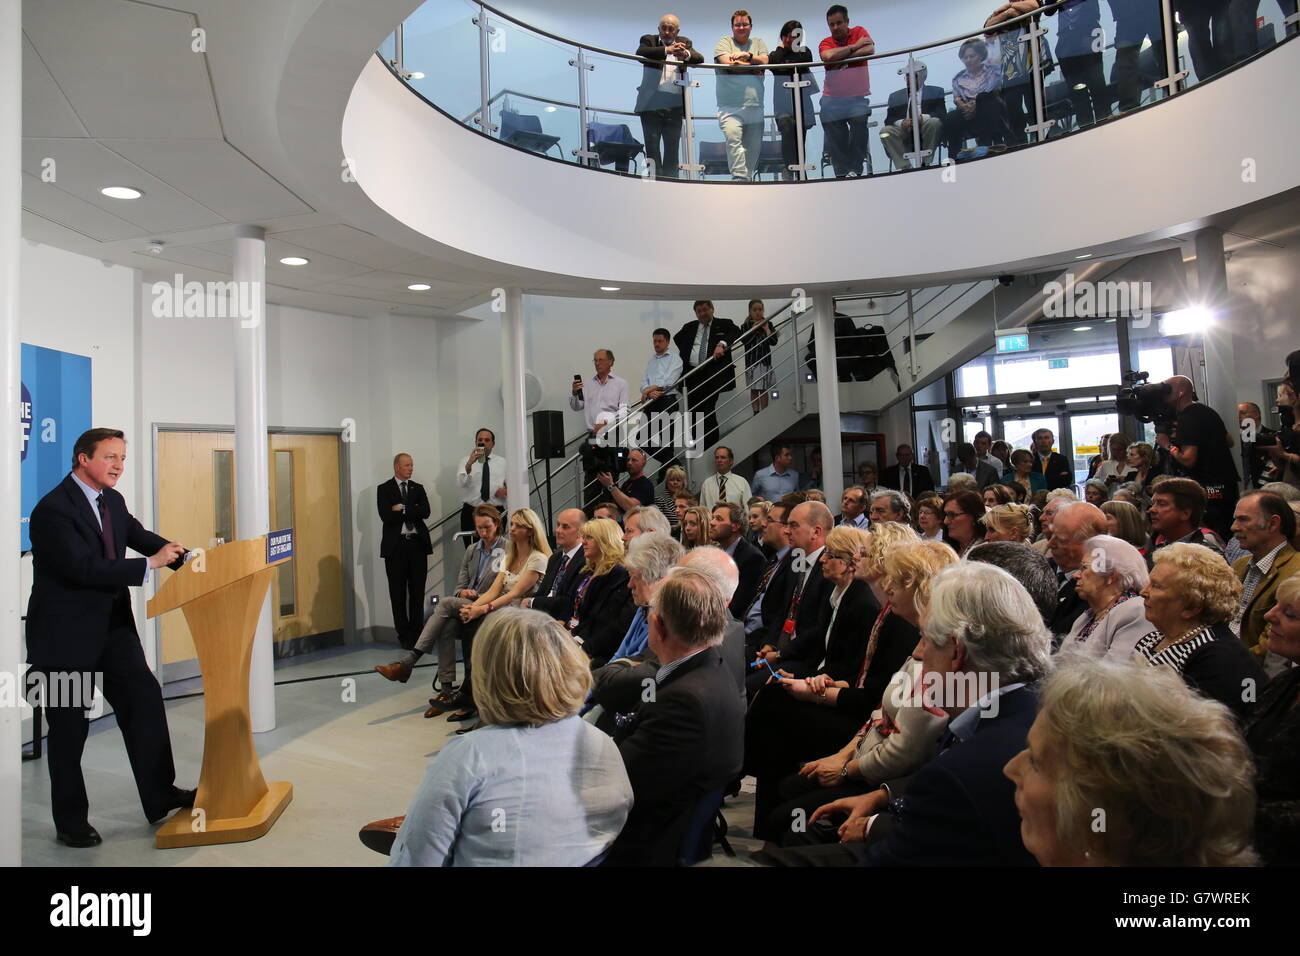 Prime Minister David Cameron speaks at Tendering Technology College in Frinton Essex, during the General Election campaign. Stock Photo